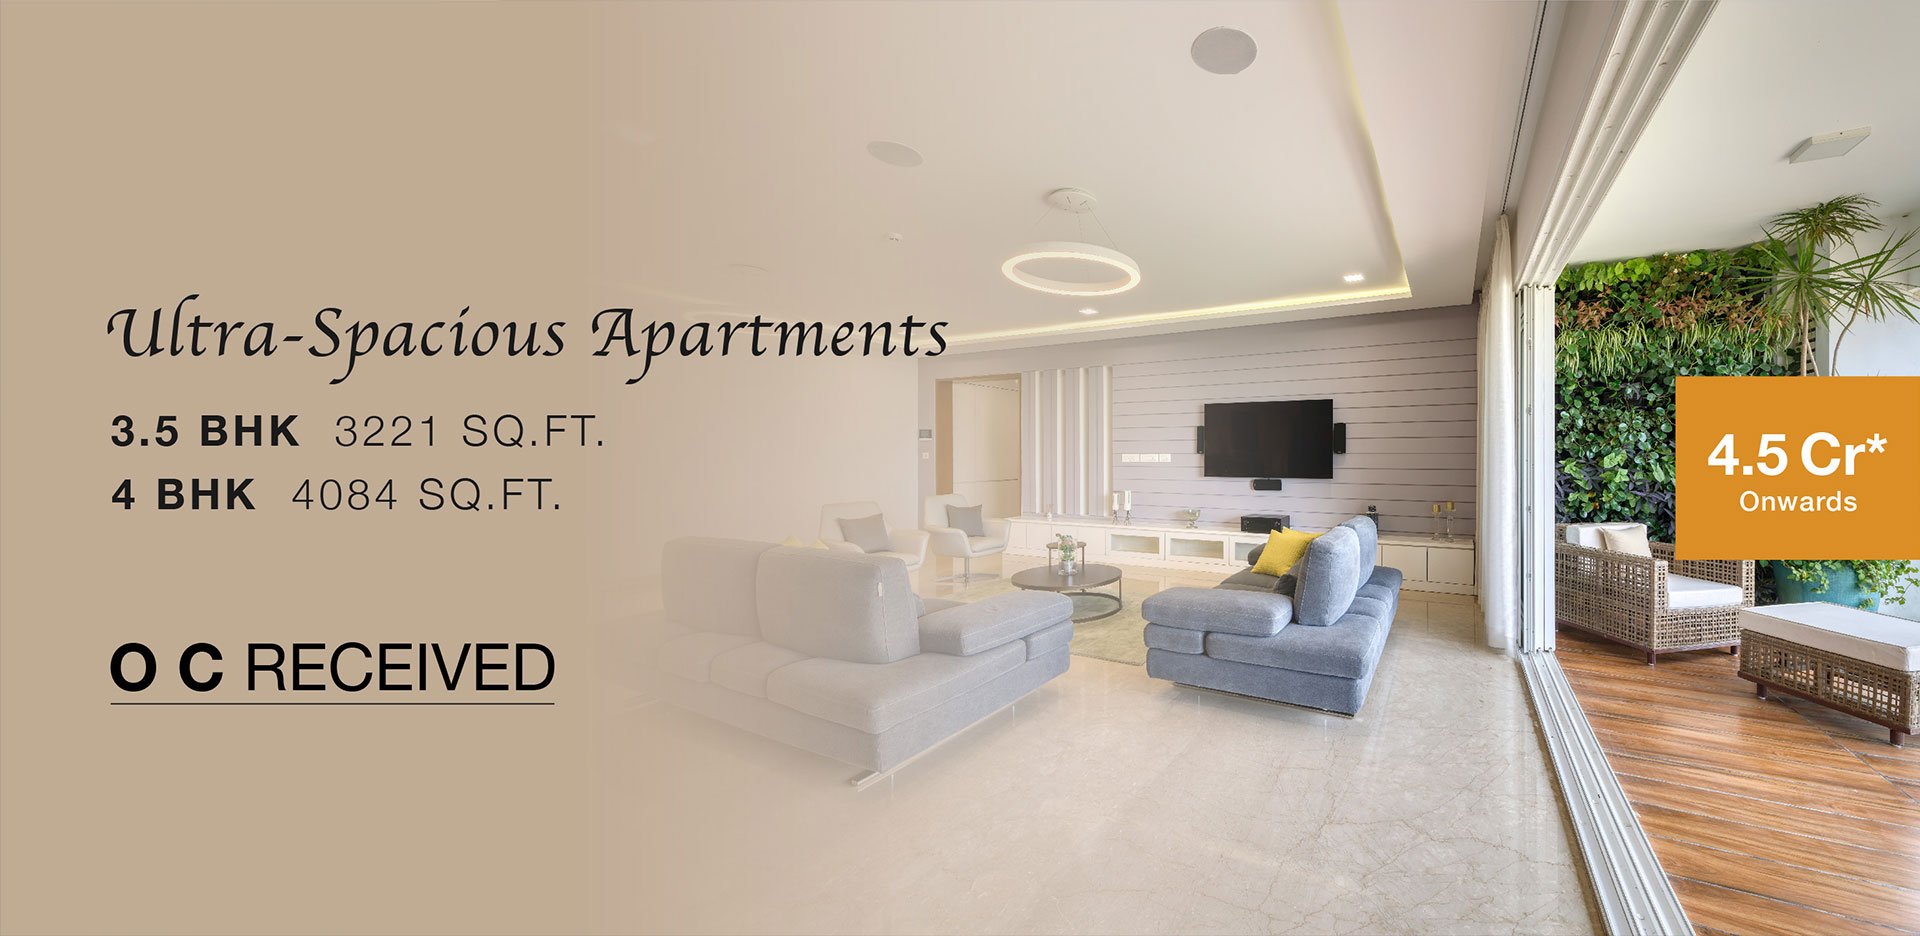 4 bhk flats for sale in bangalore